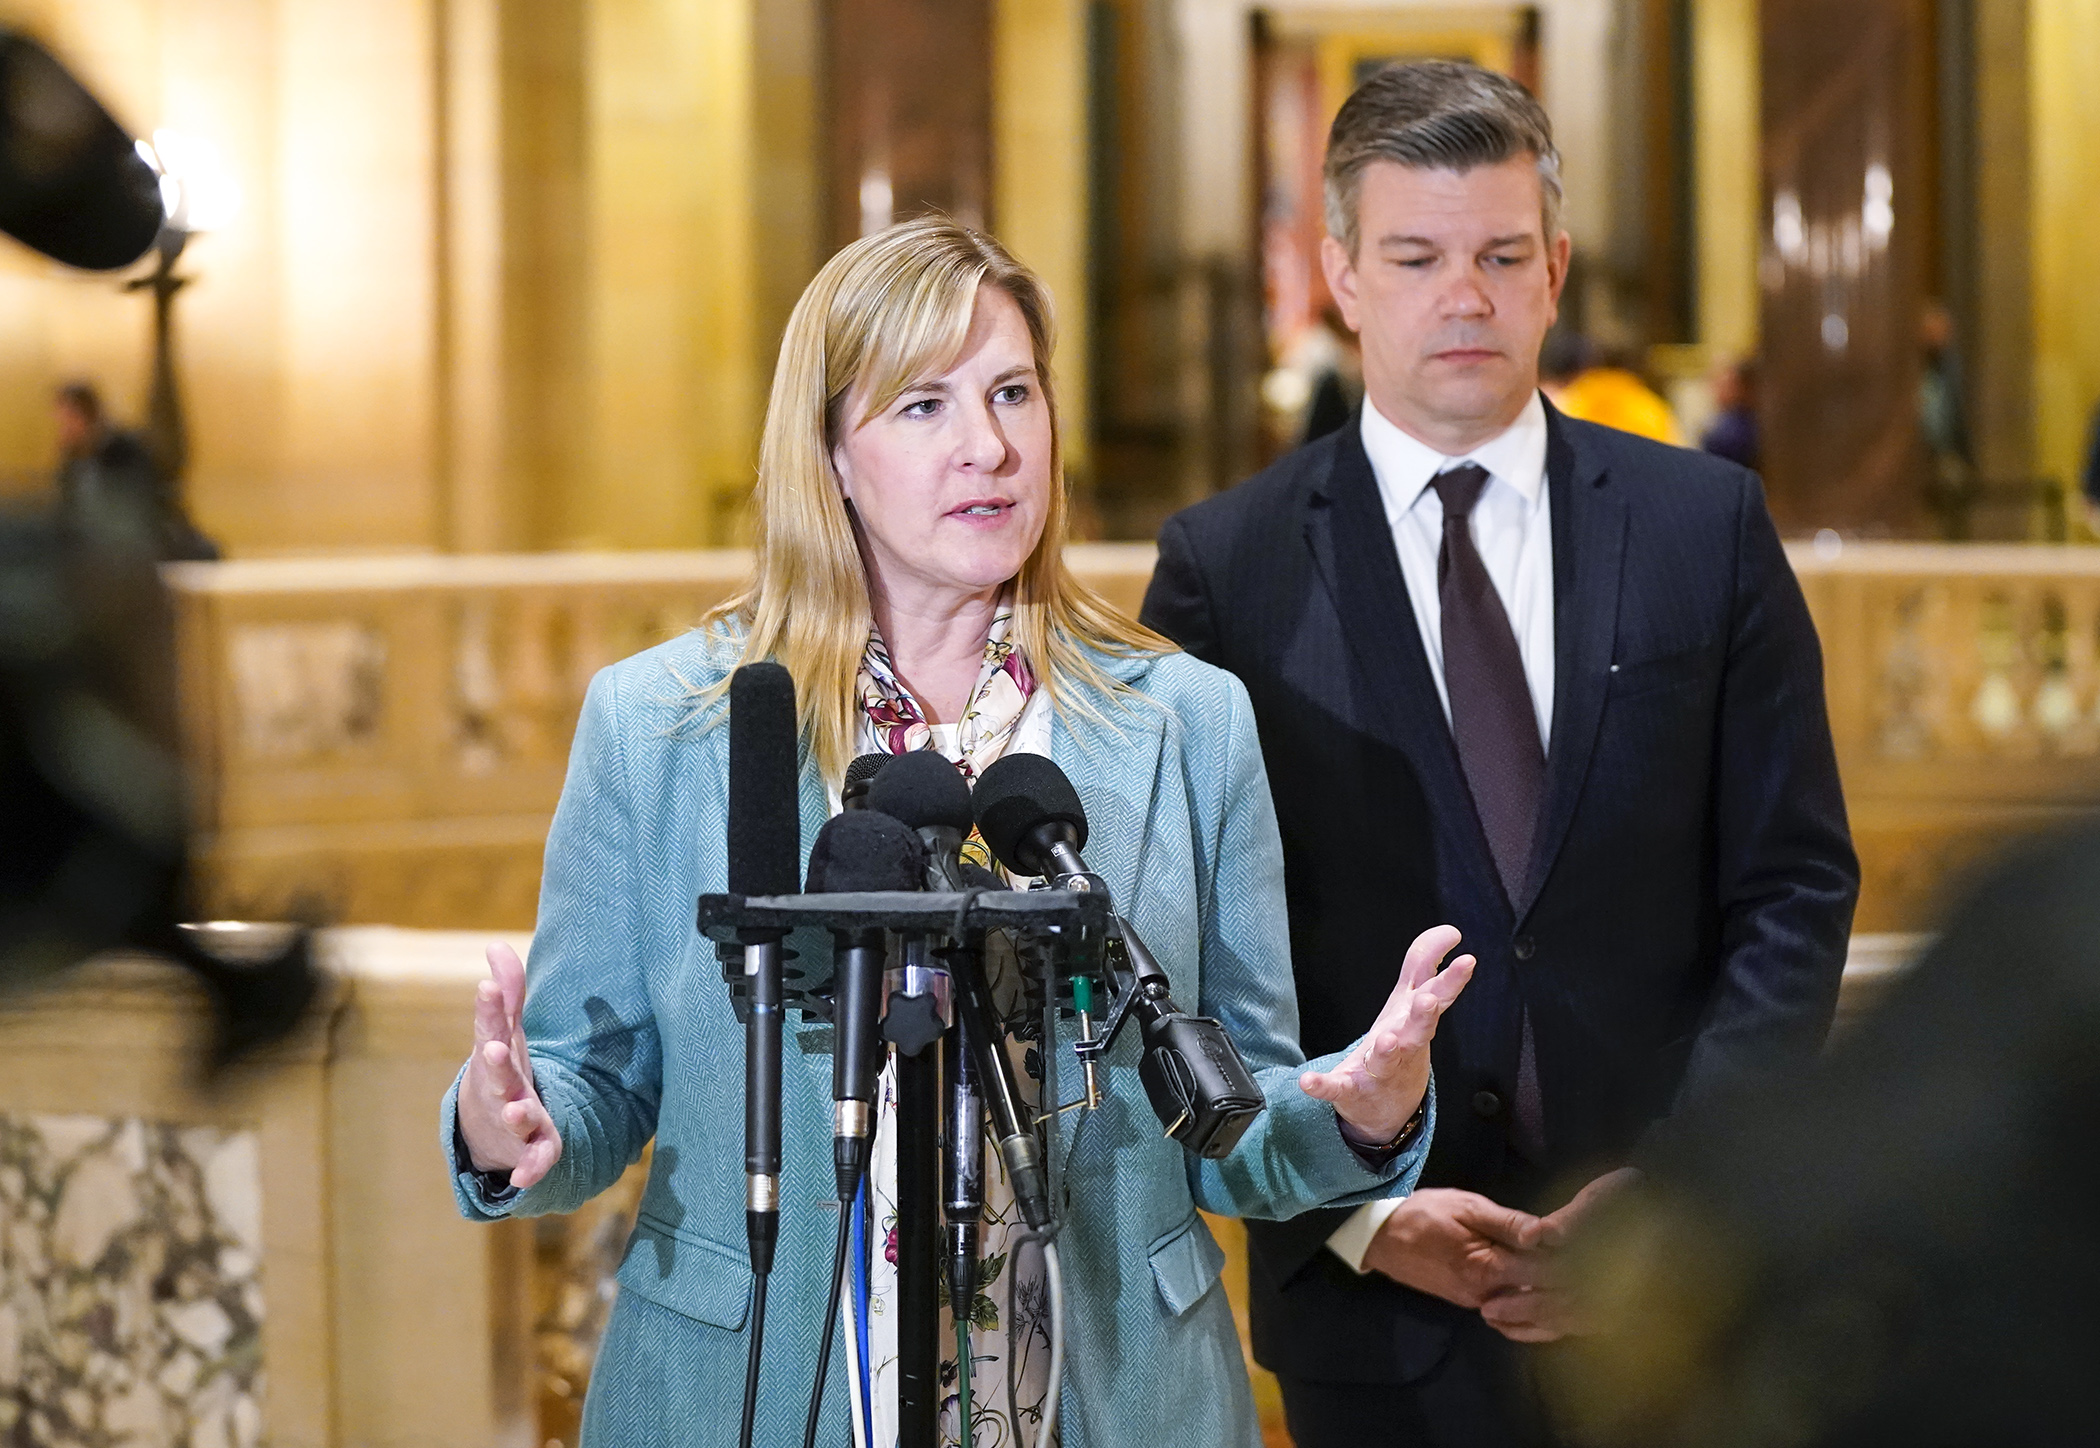 House Speaker Melissa Hortman and House Majority Leader Ryan Winkler speak with the media shortly after midnight May 23 after the House and Senate adjourned without passing most major supplemental spending bills. (Photo by Paul Battaglia)